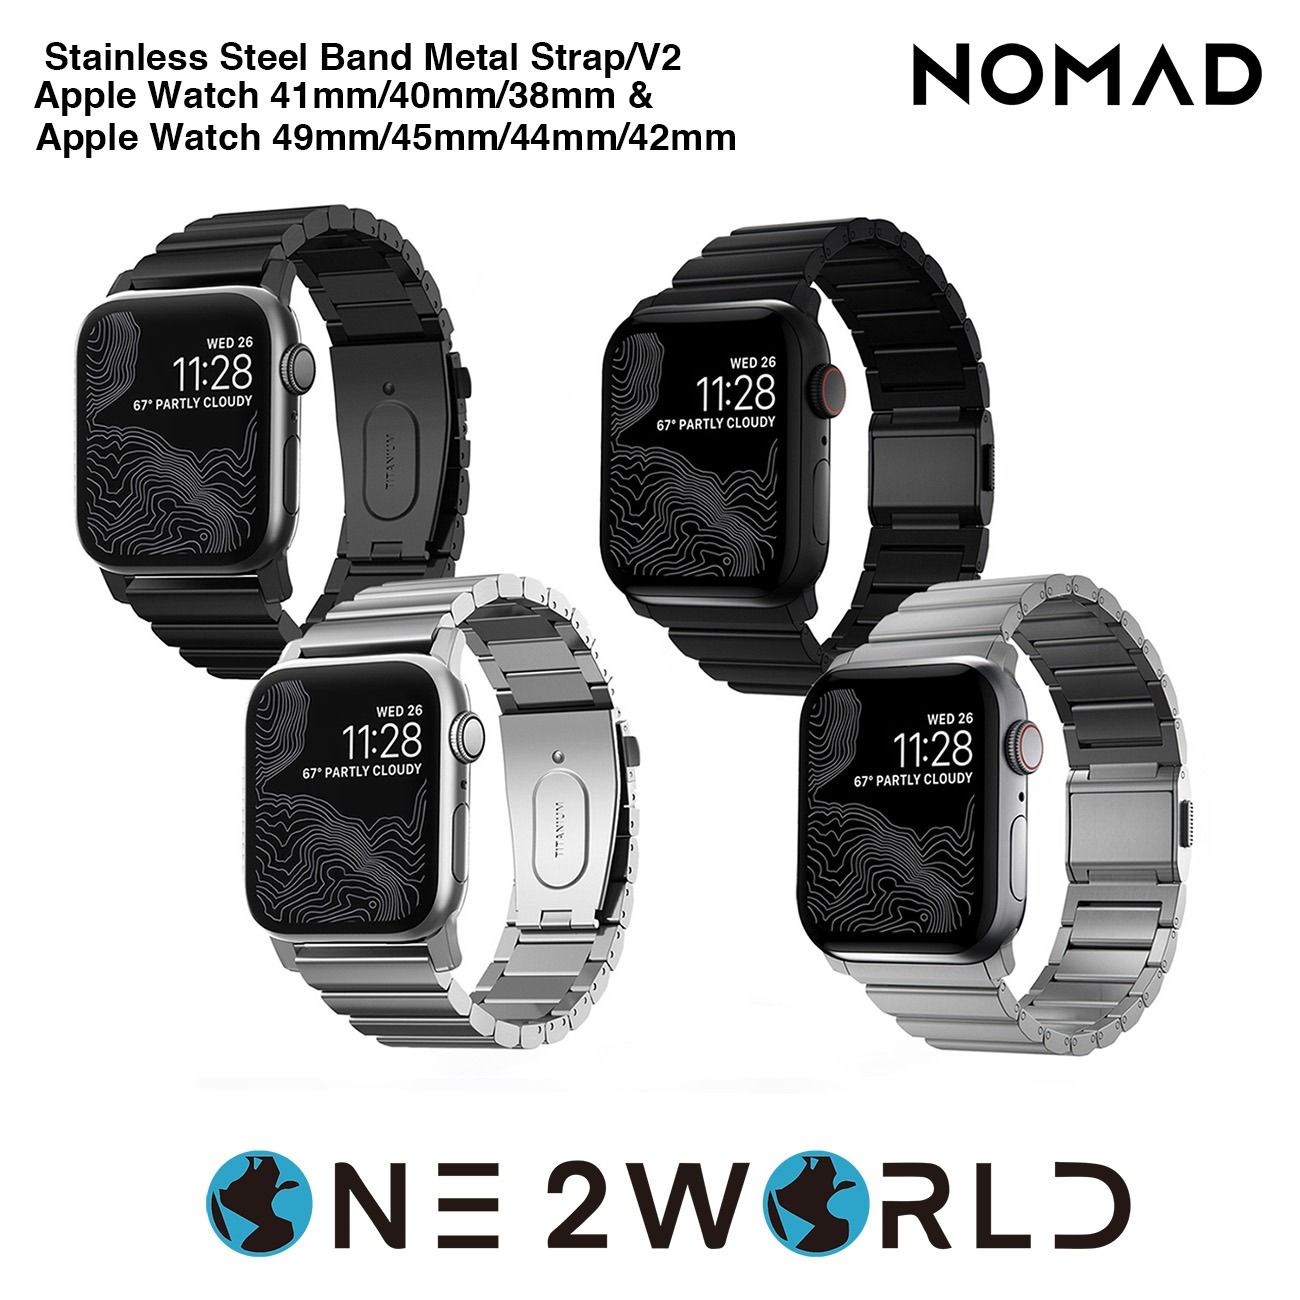 NOMAD Titanium Band Metal Strap Wearables Apple on Gadgets, for & Watches Mobile Watch Phones 49mm/45mm/44mm/42mm, Carousell & Smart 41mm/40mm/38mm | V2 